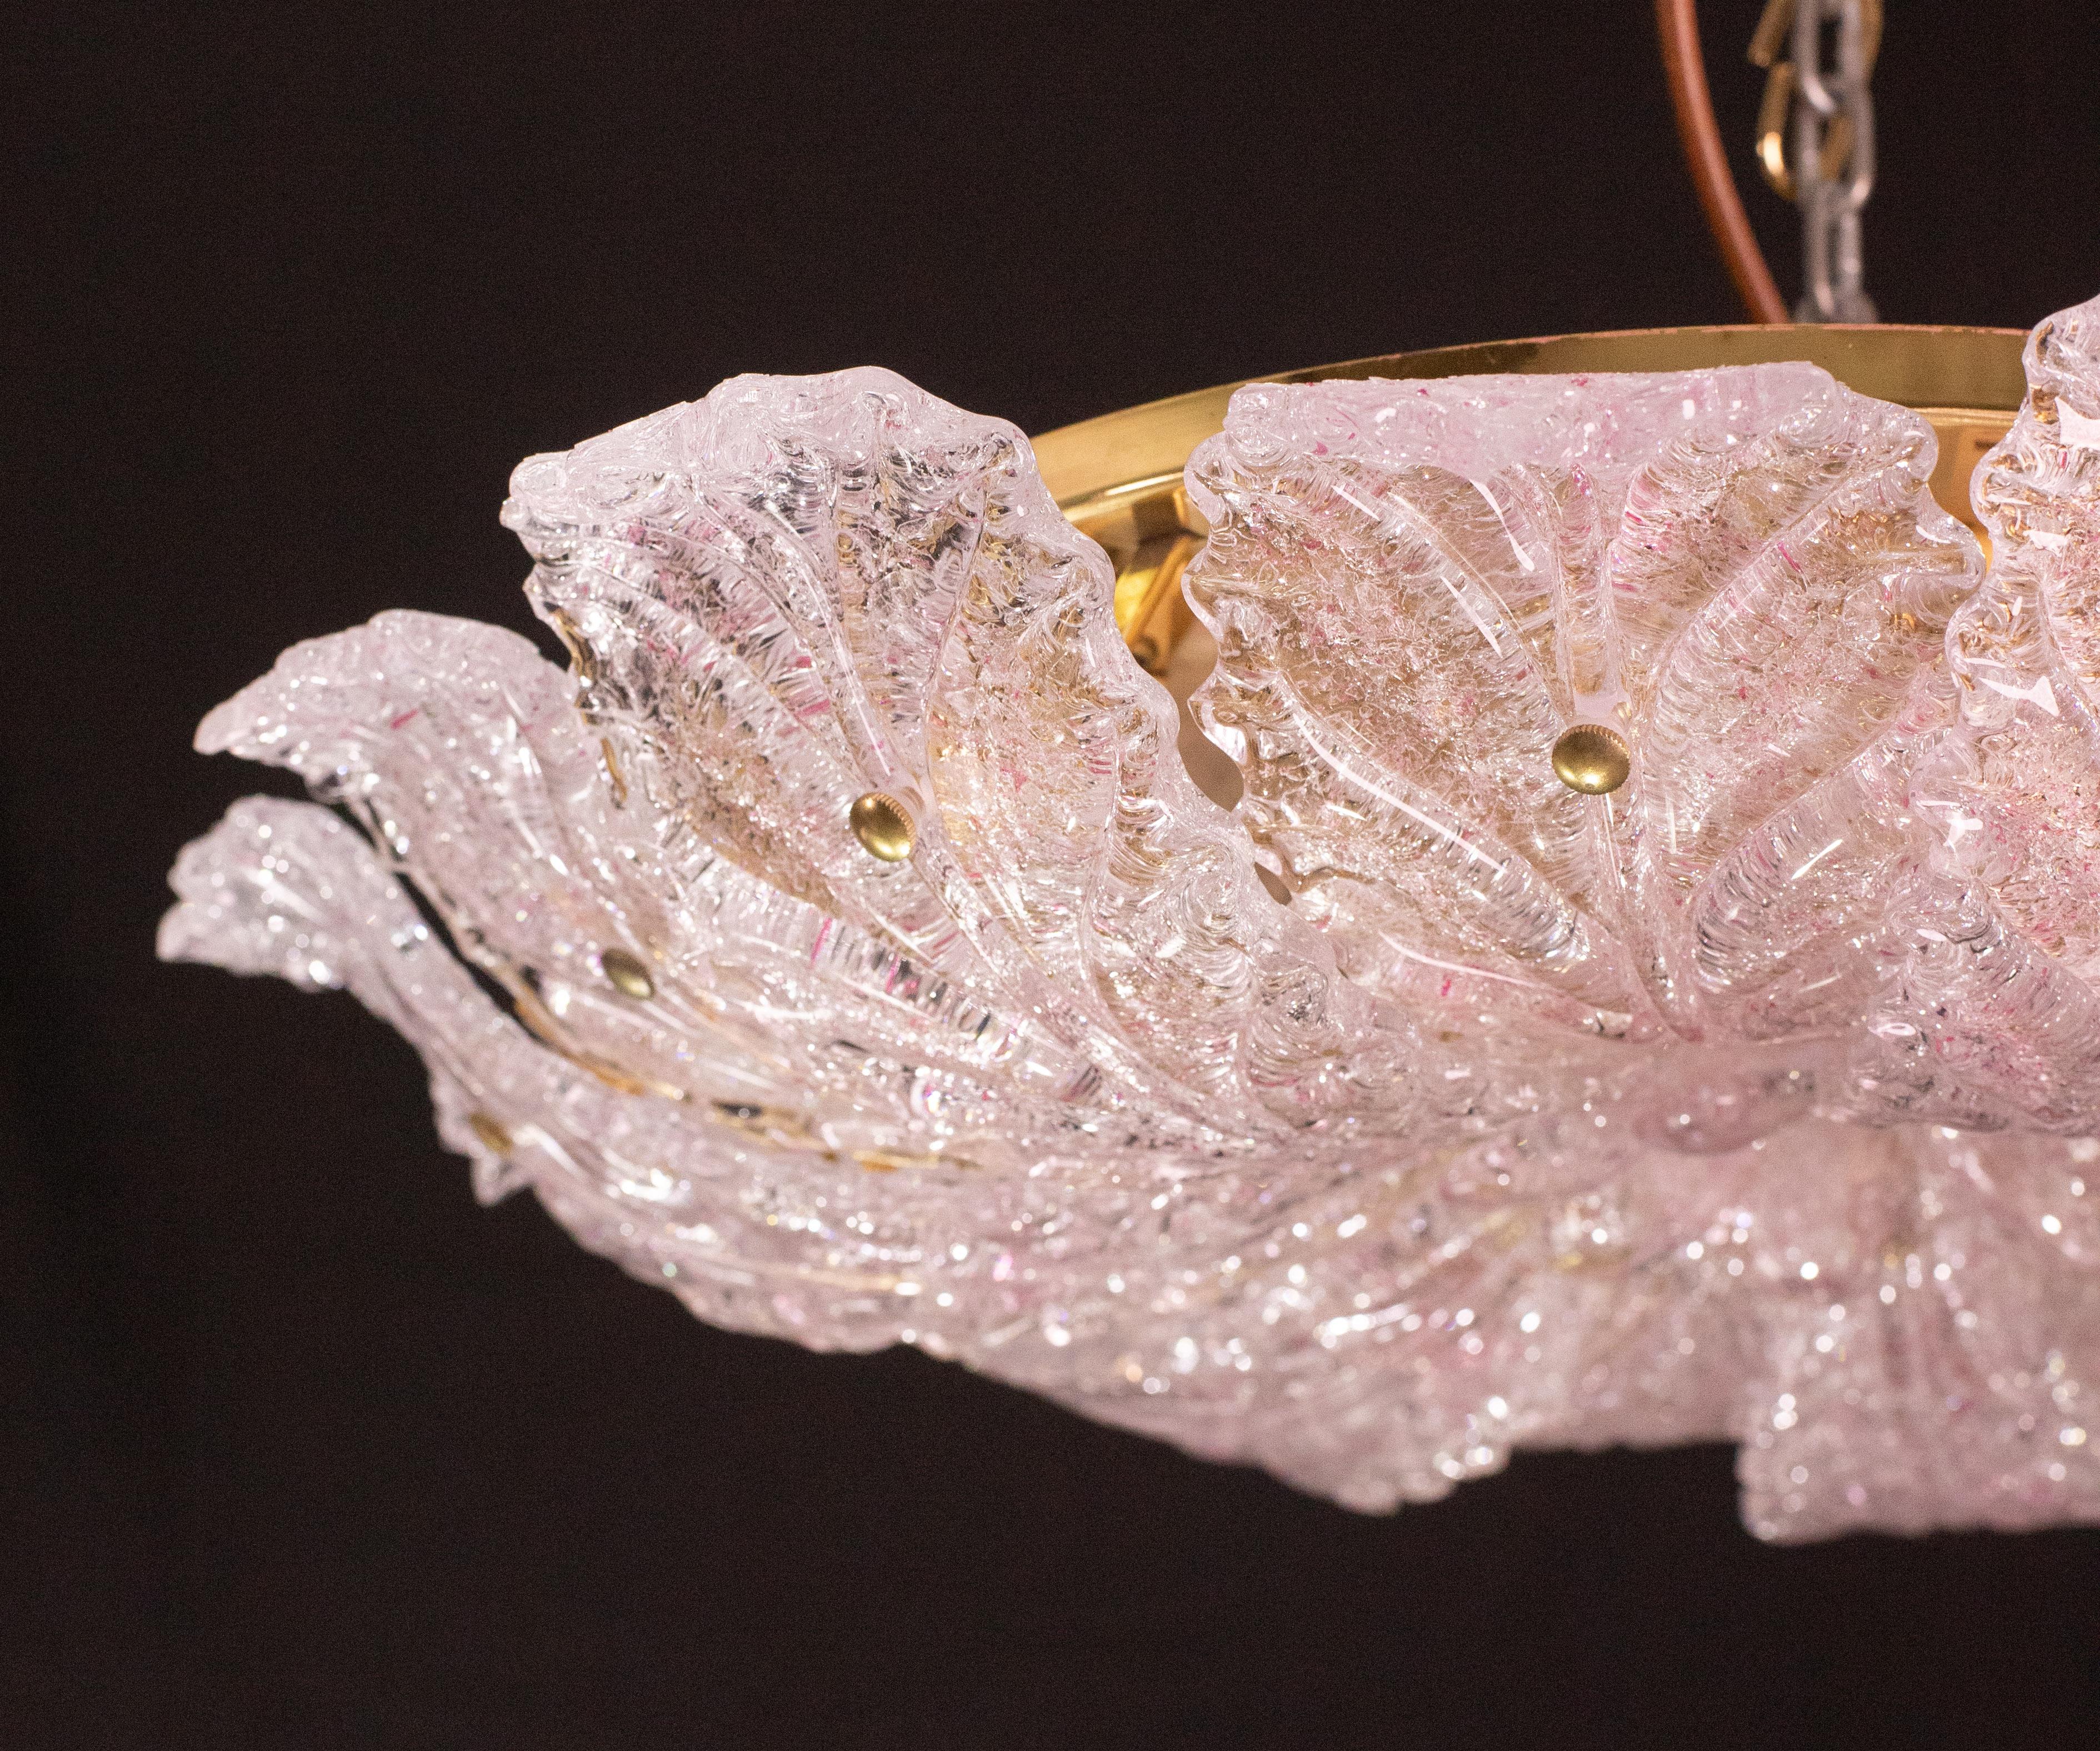 Amazing Pink Murano Glass Leave Ceiling Light or Chandelier, 1970s For Sale 5